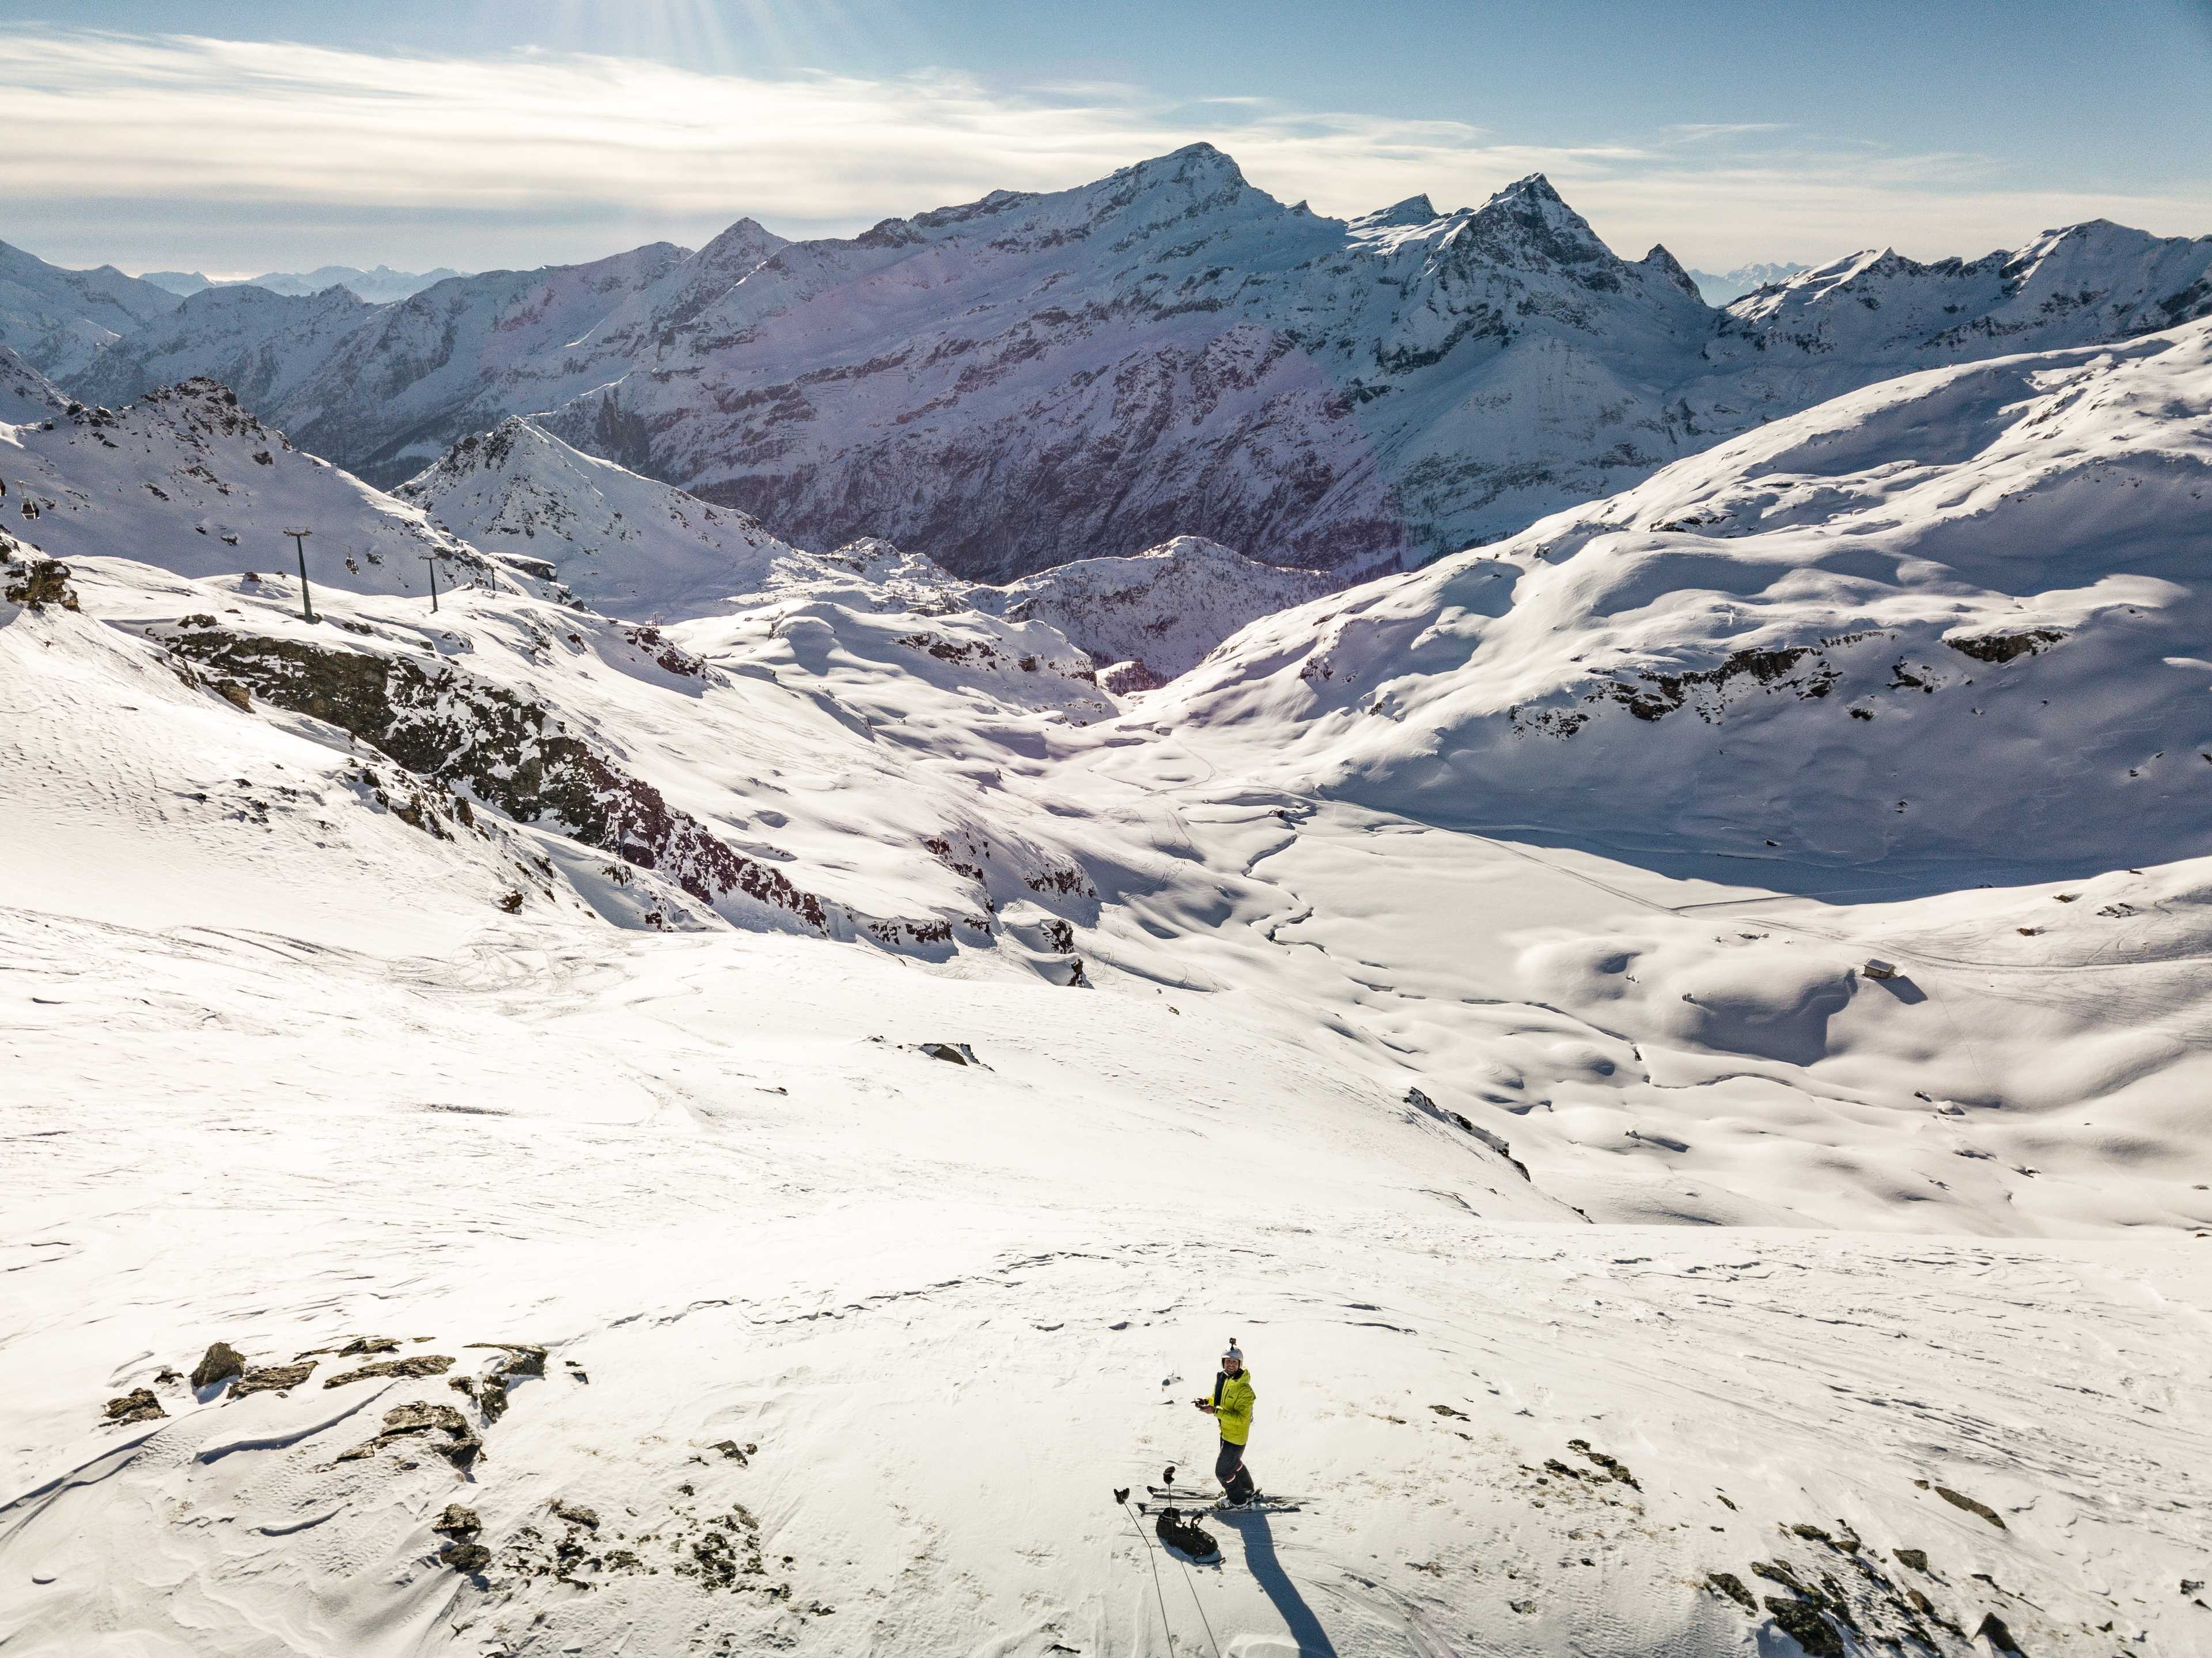 All this entire area is available for skiers. Monterosa Ski